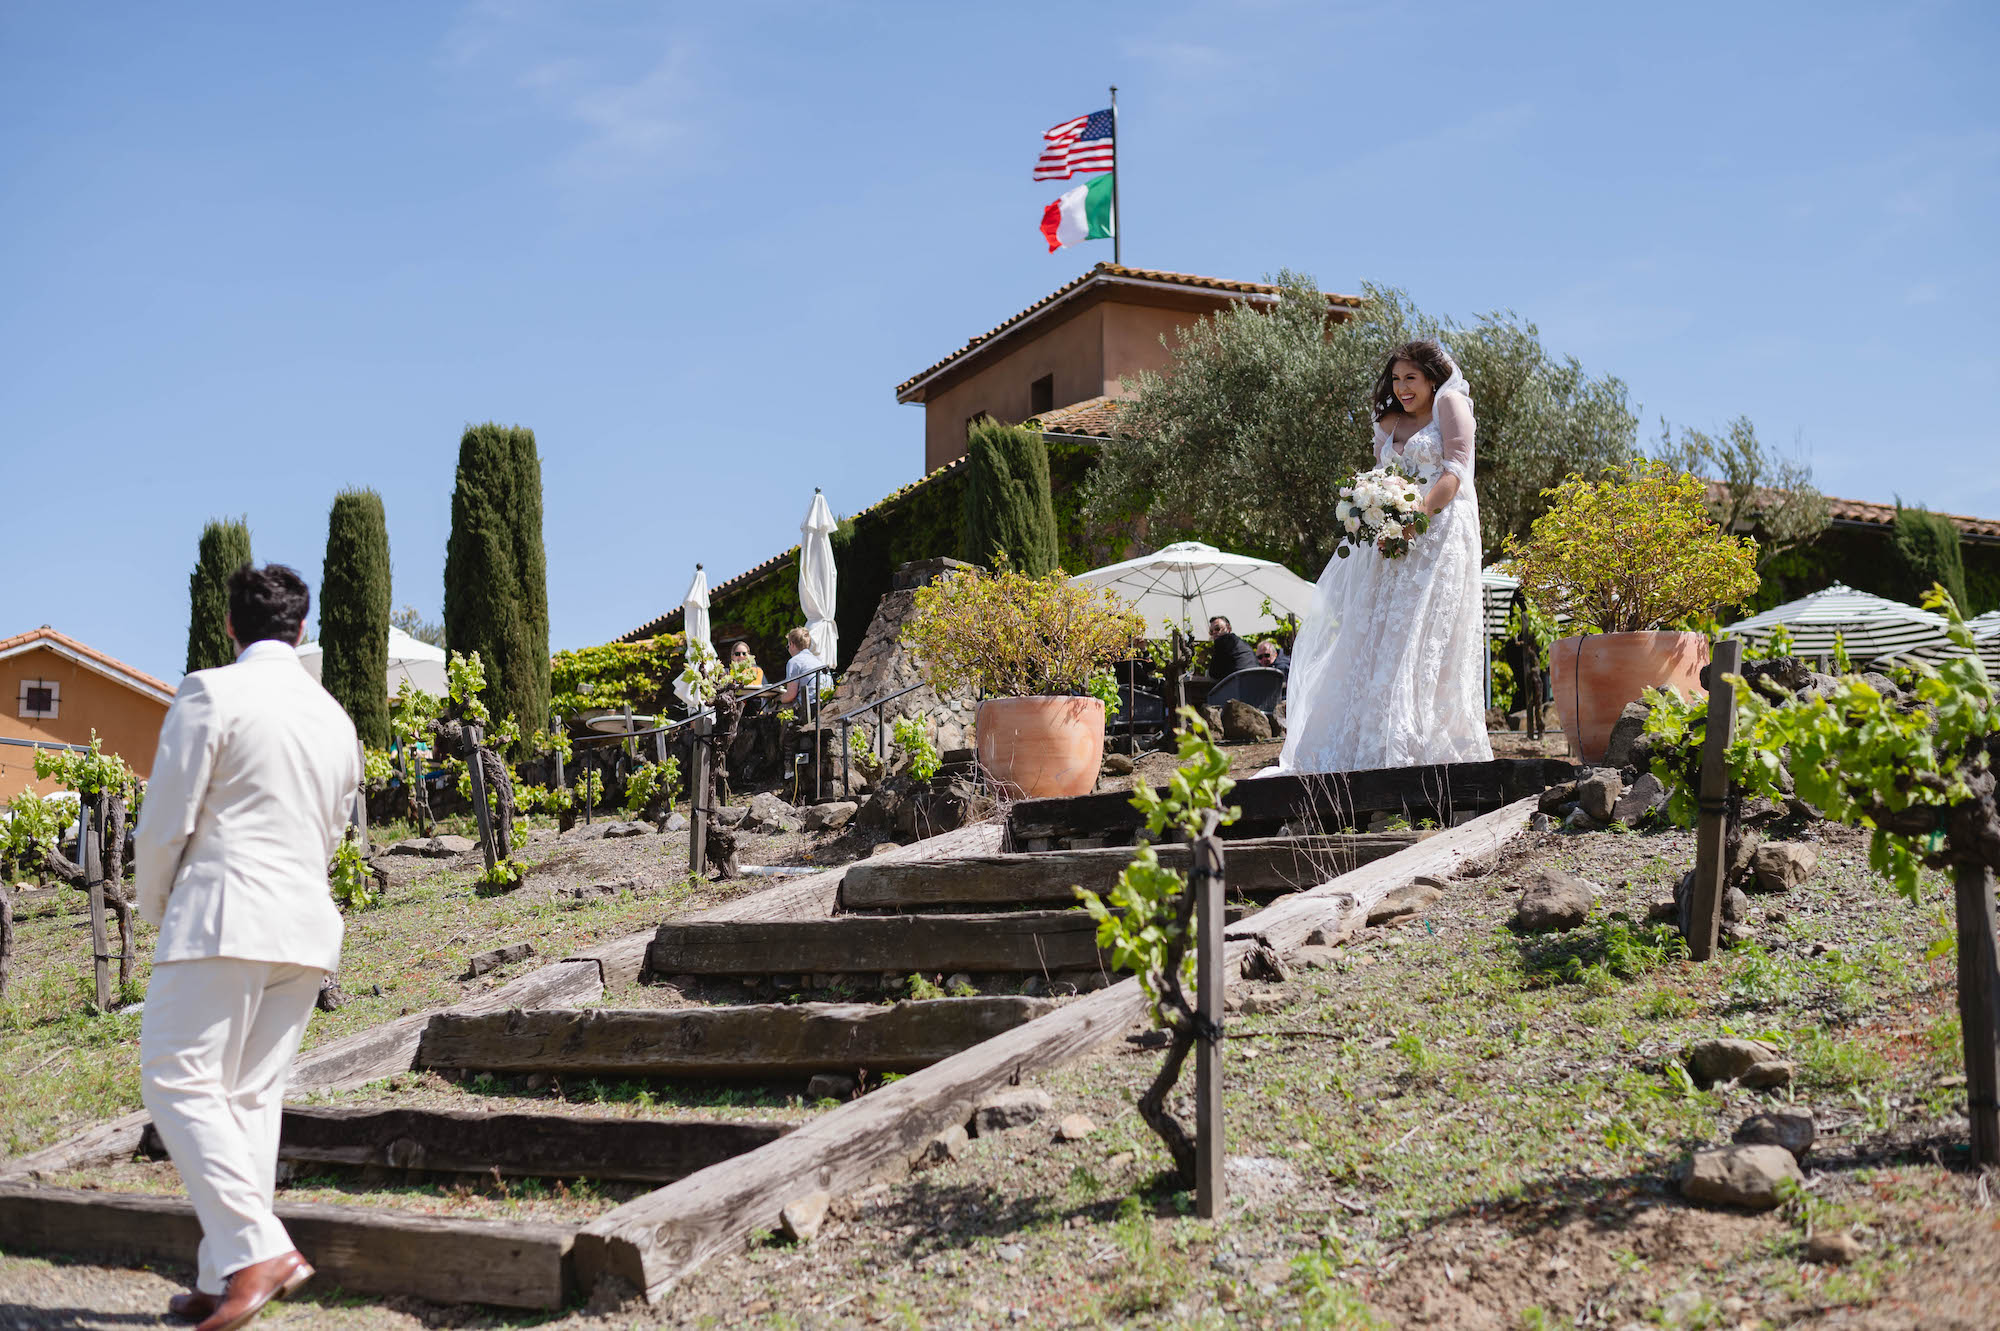 First Look for bride and groom for this Soft Romantic + Minimalistic Wedding at Viansa Winery in Sonoma Jen Vazquez Photography